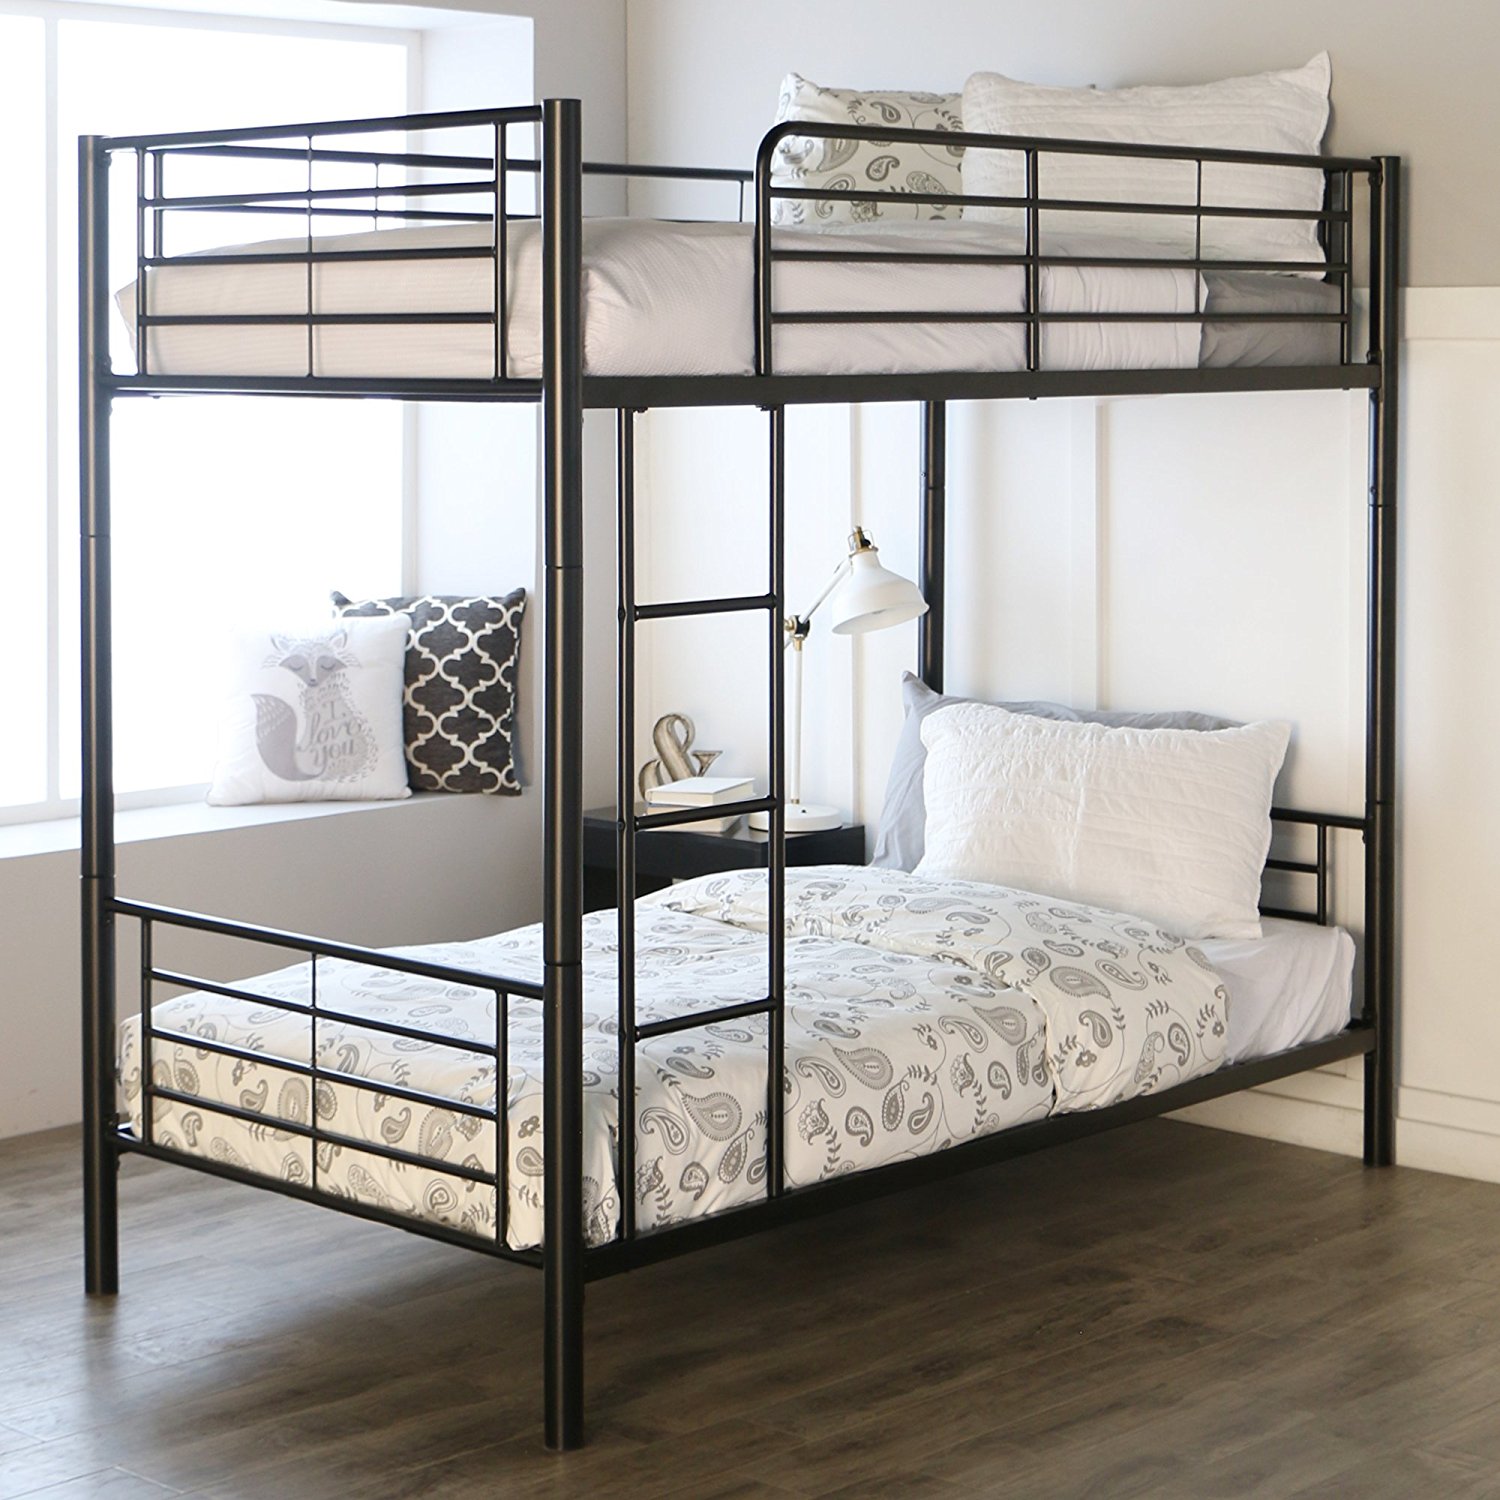 Sturdy Metal Twin-over-Twin Bunk Bed in Black Finish